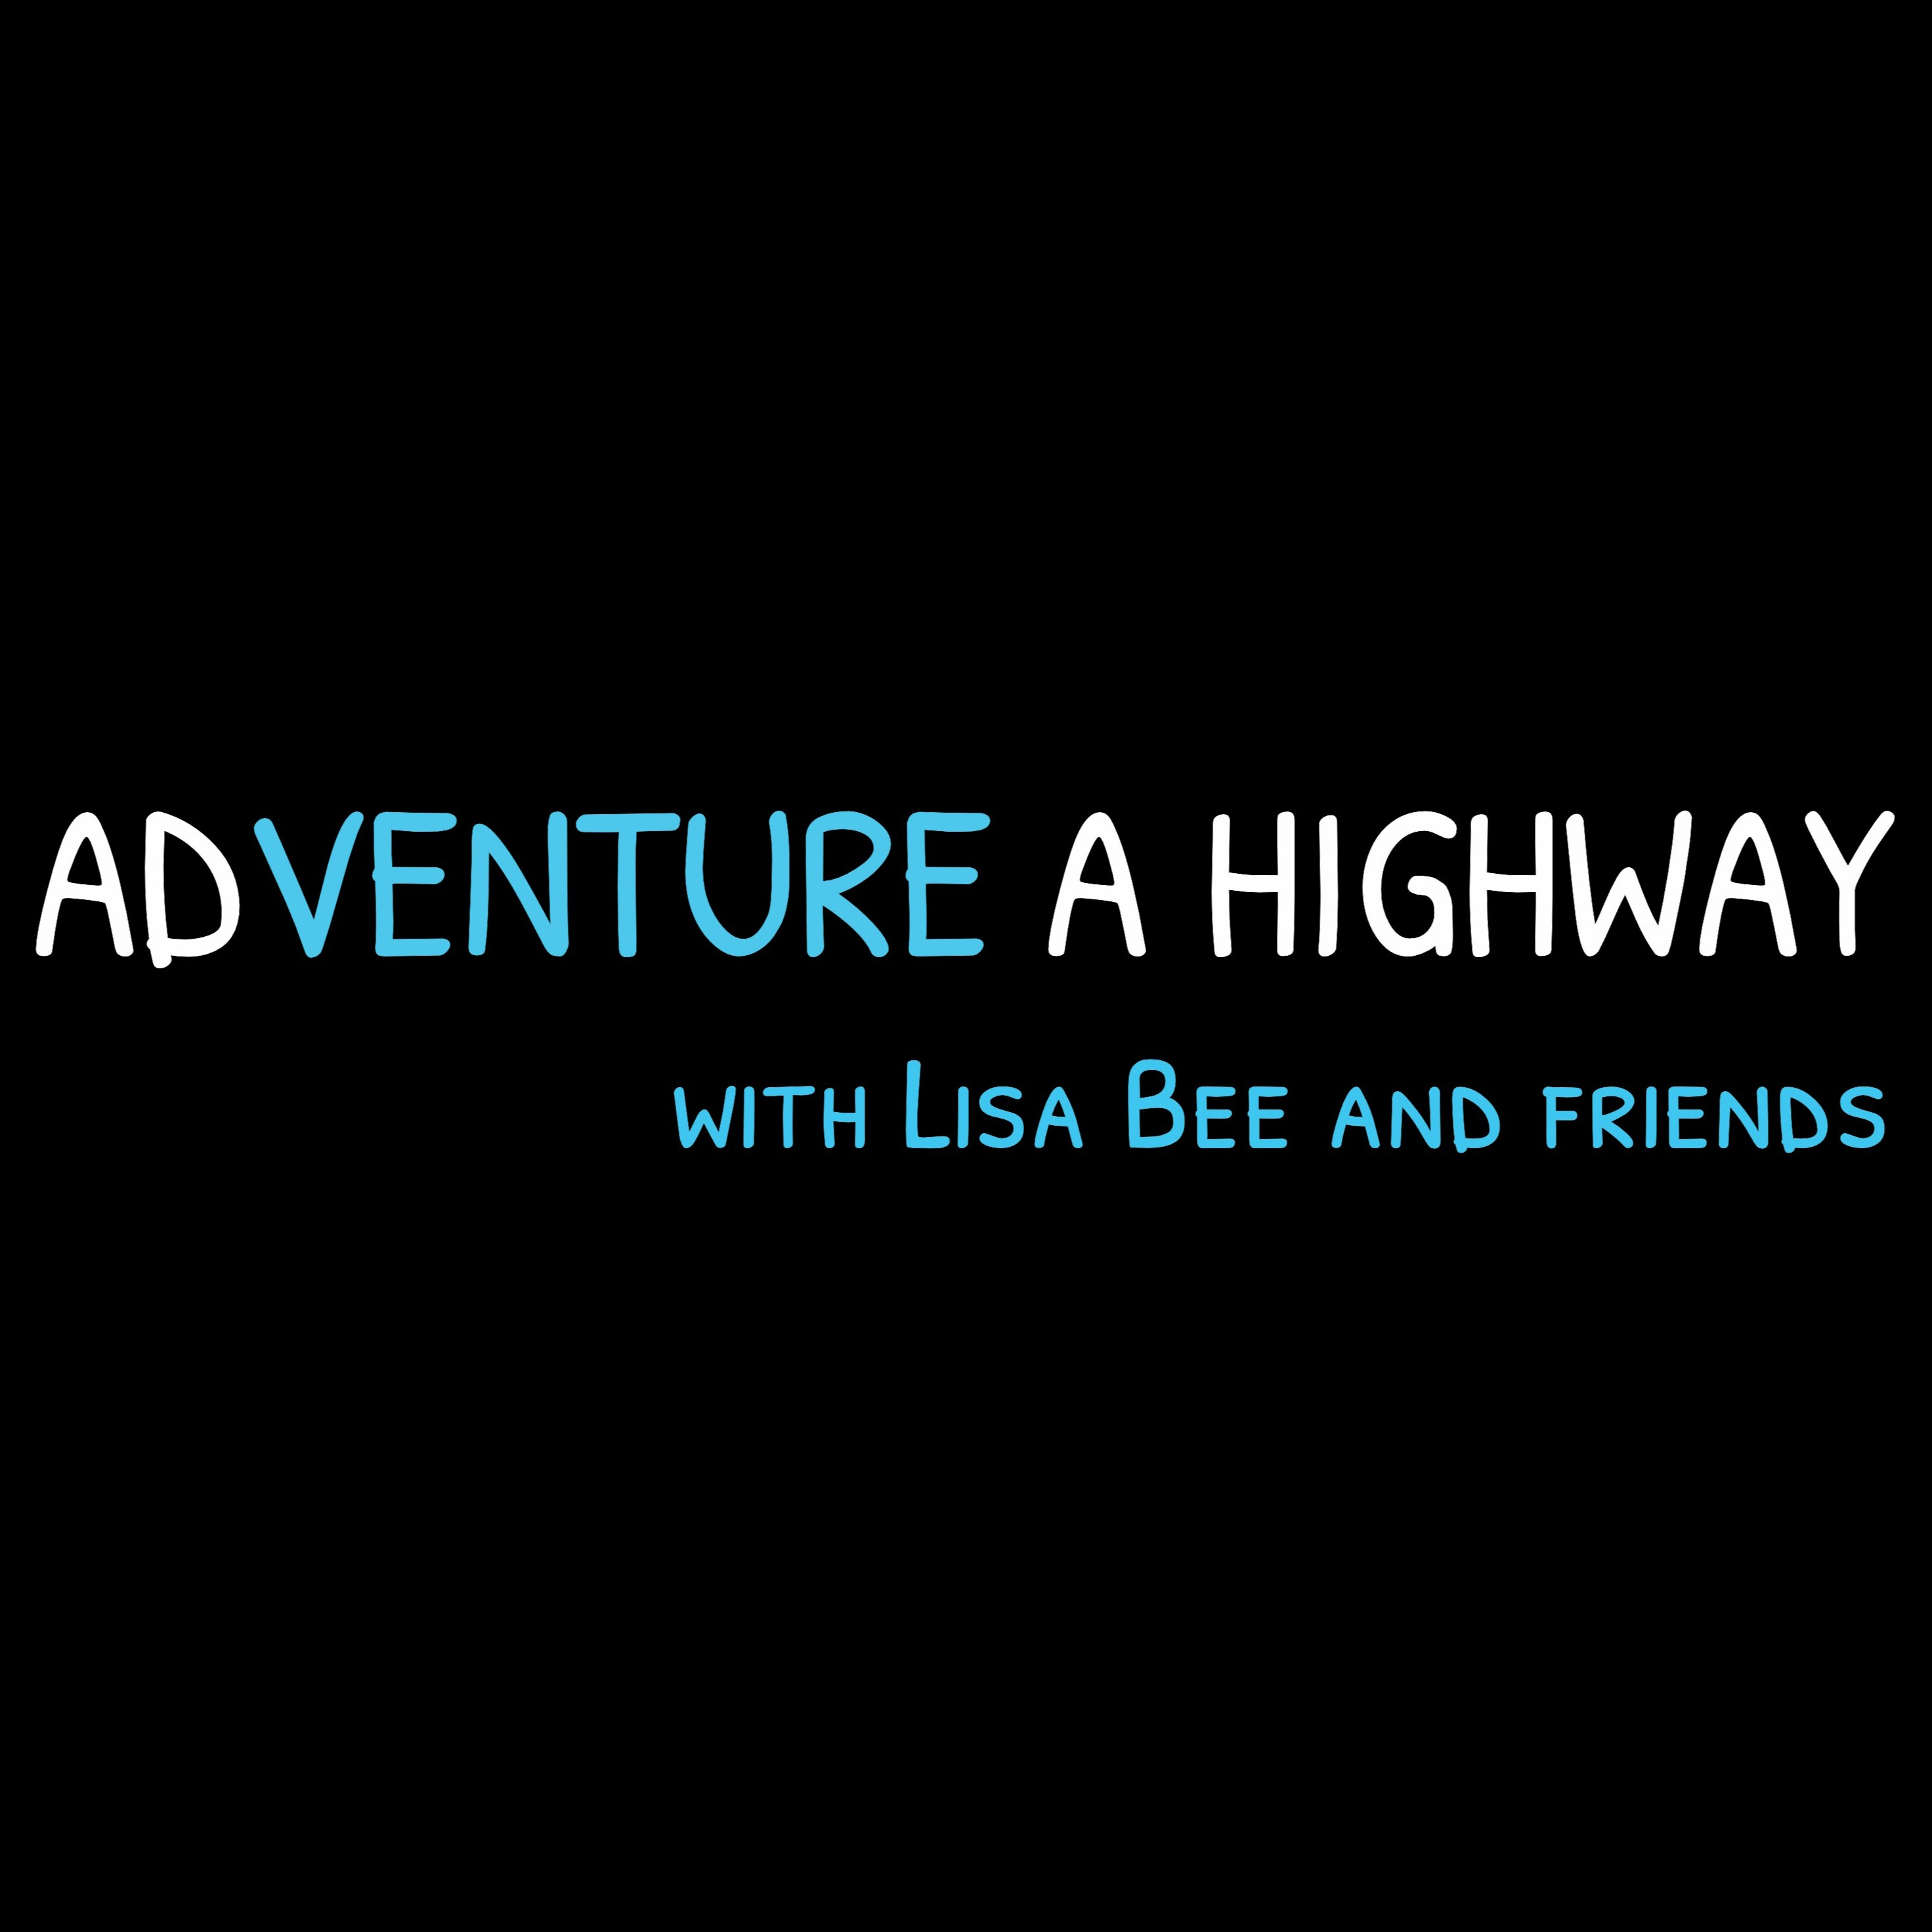 Adventure A Highway with Lisa Bee and Friends